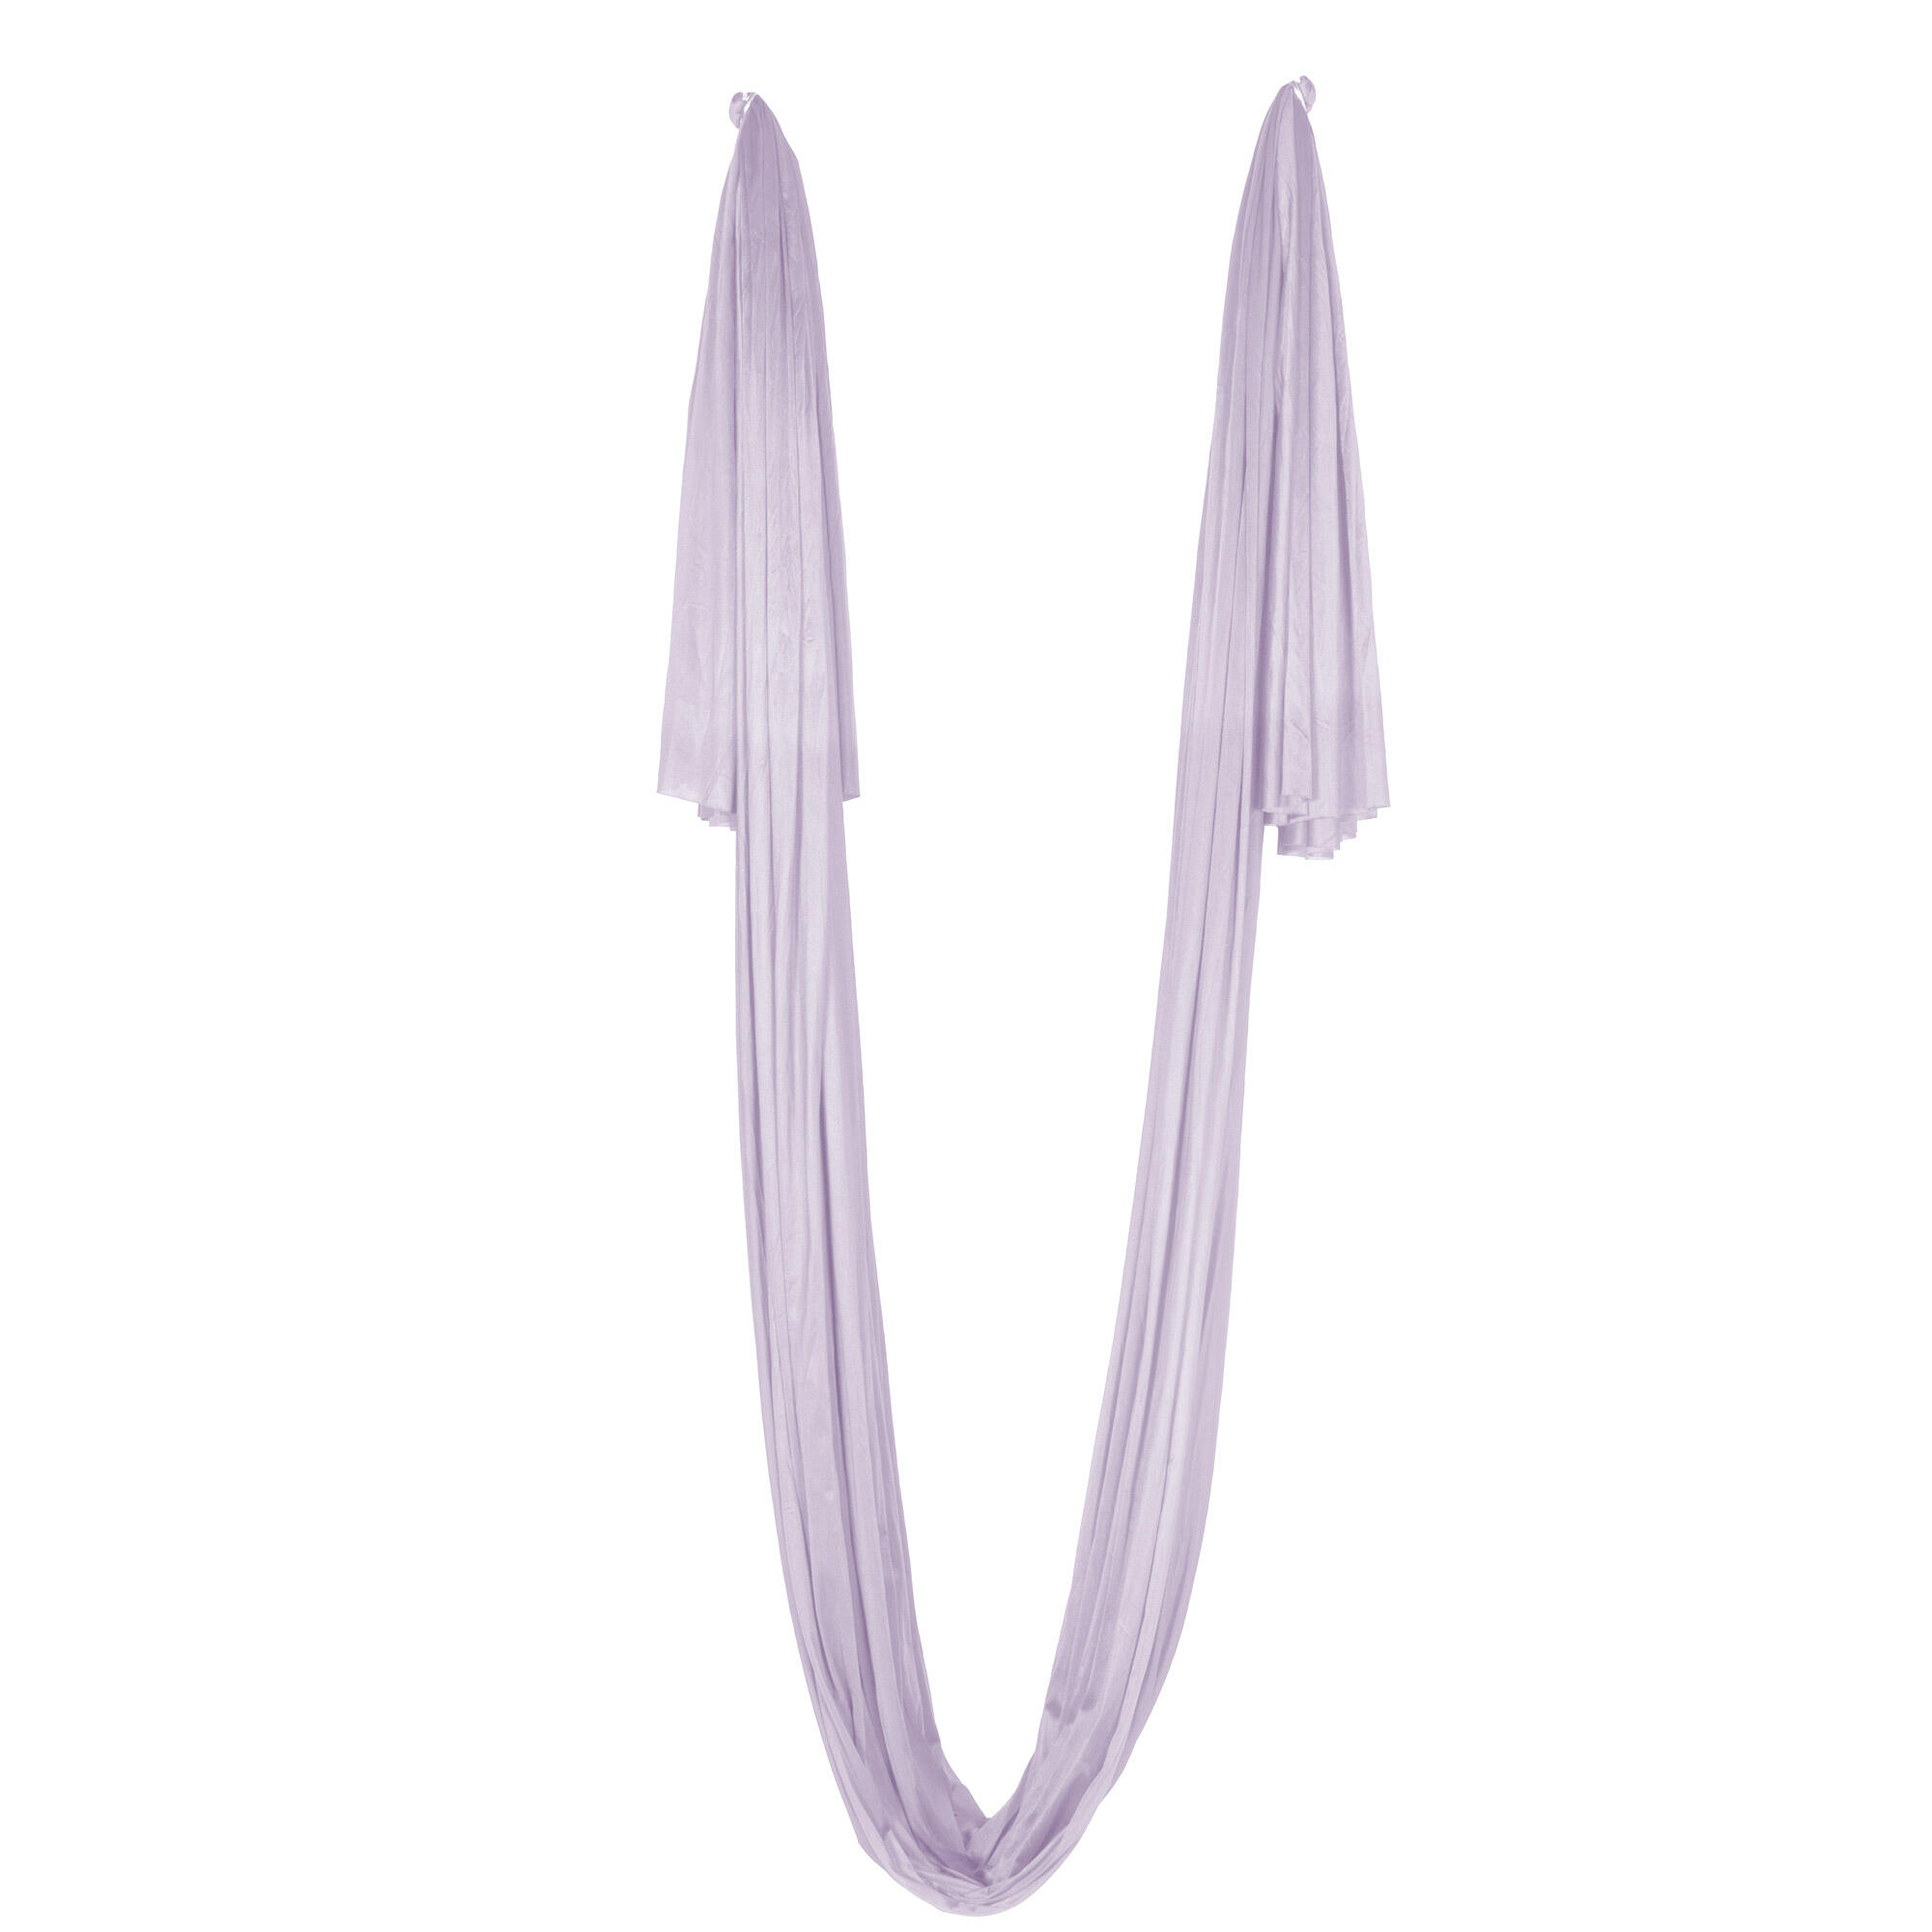 6m Prodigy Aerial Fabric for Hammocks -Lilac with round Prodigy bag 2/5